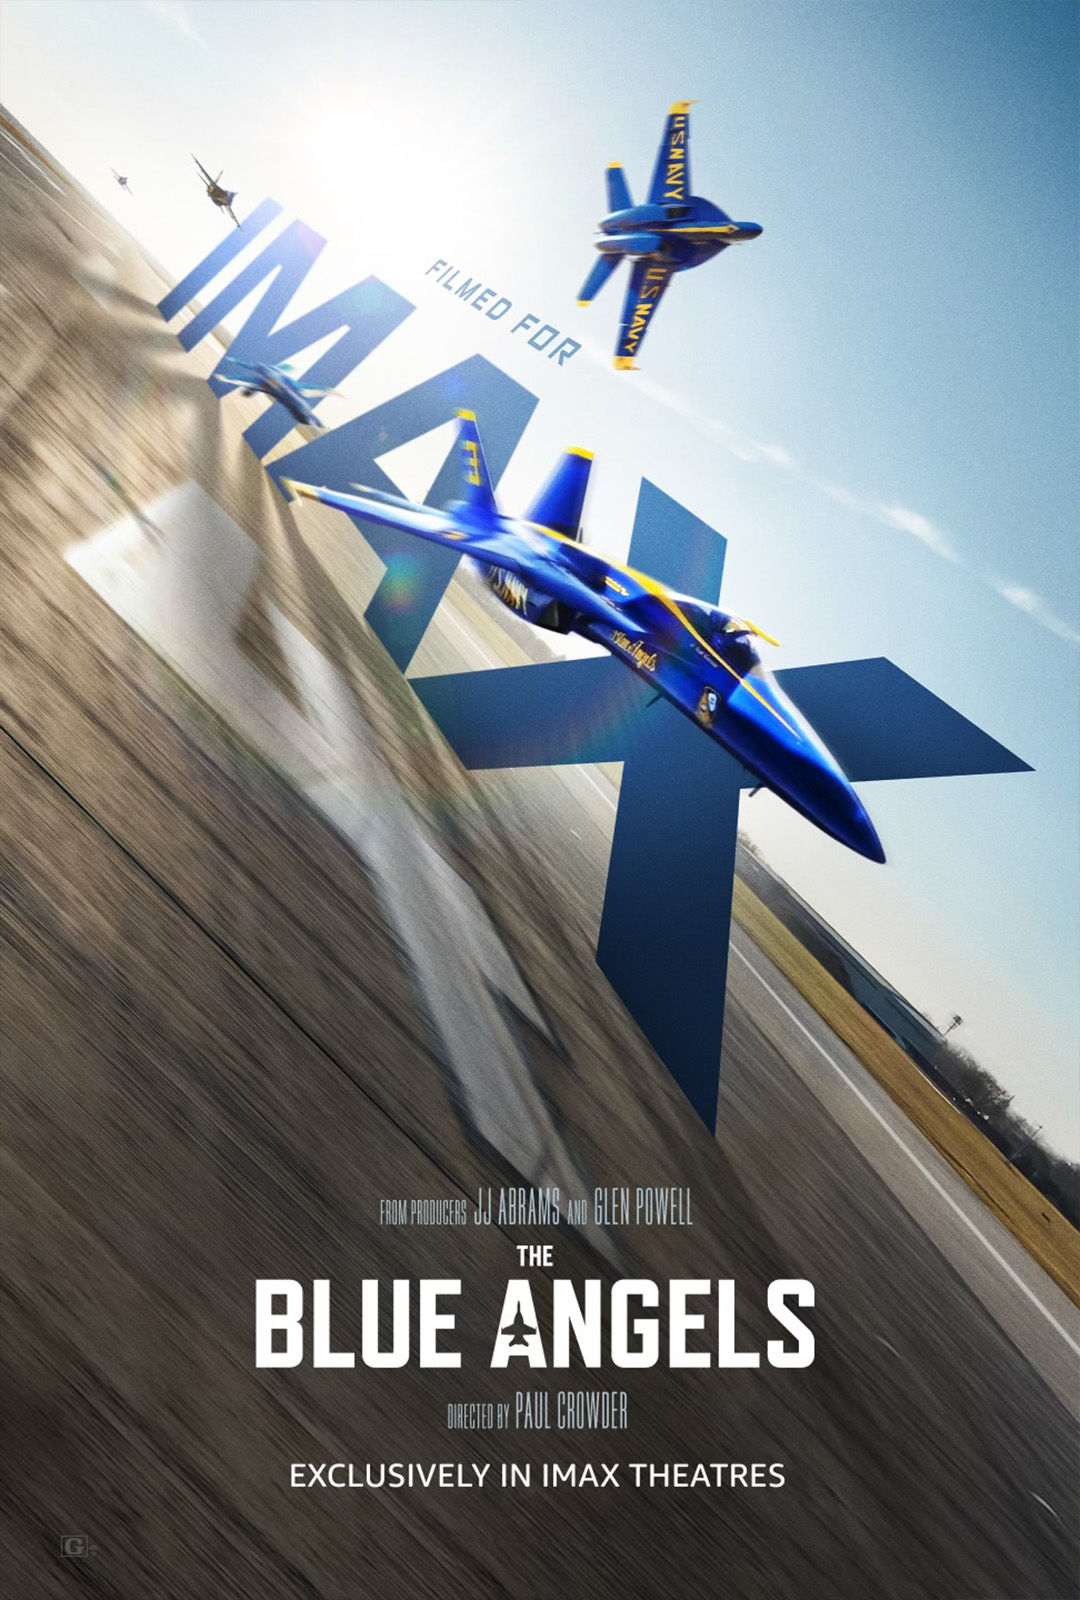 Movie Poster: The Blue Angels